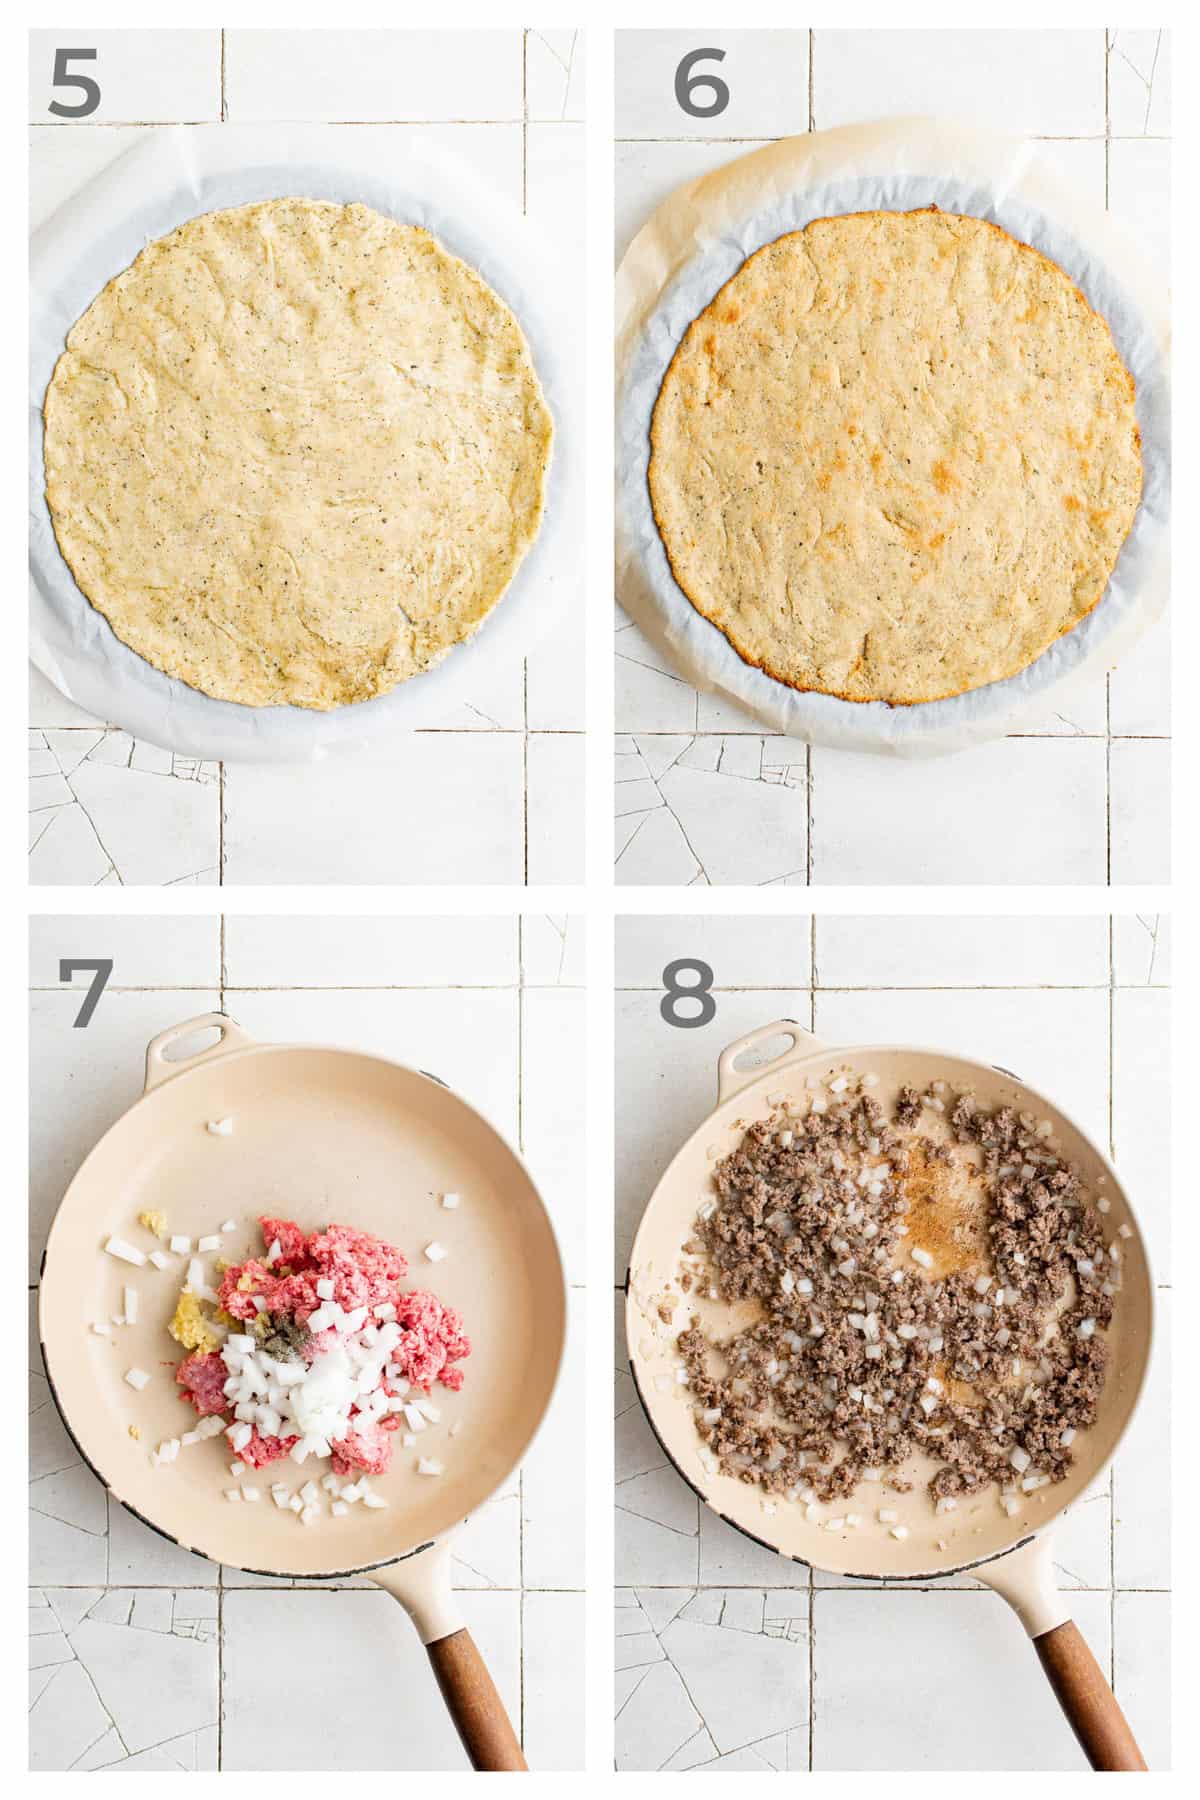 Step by step directions for making a gluten free pizza